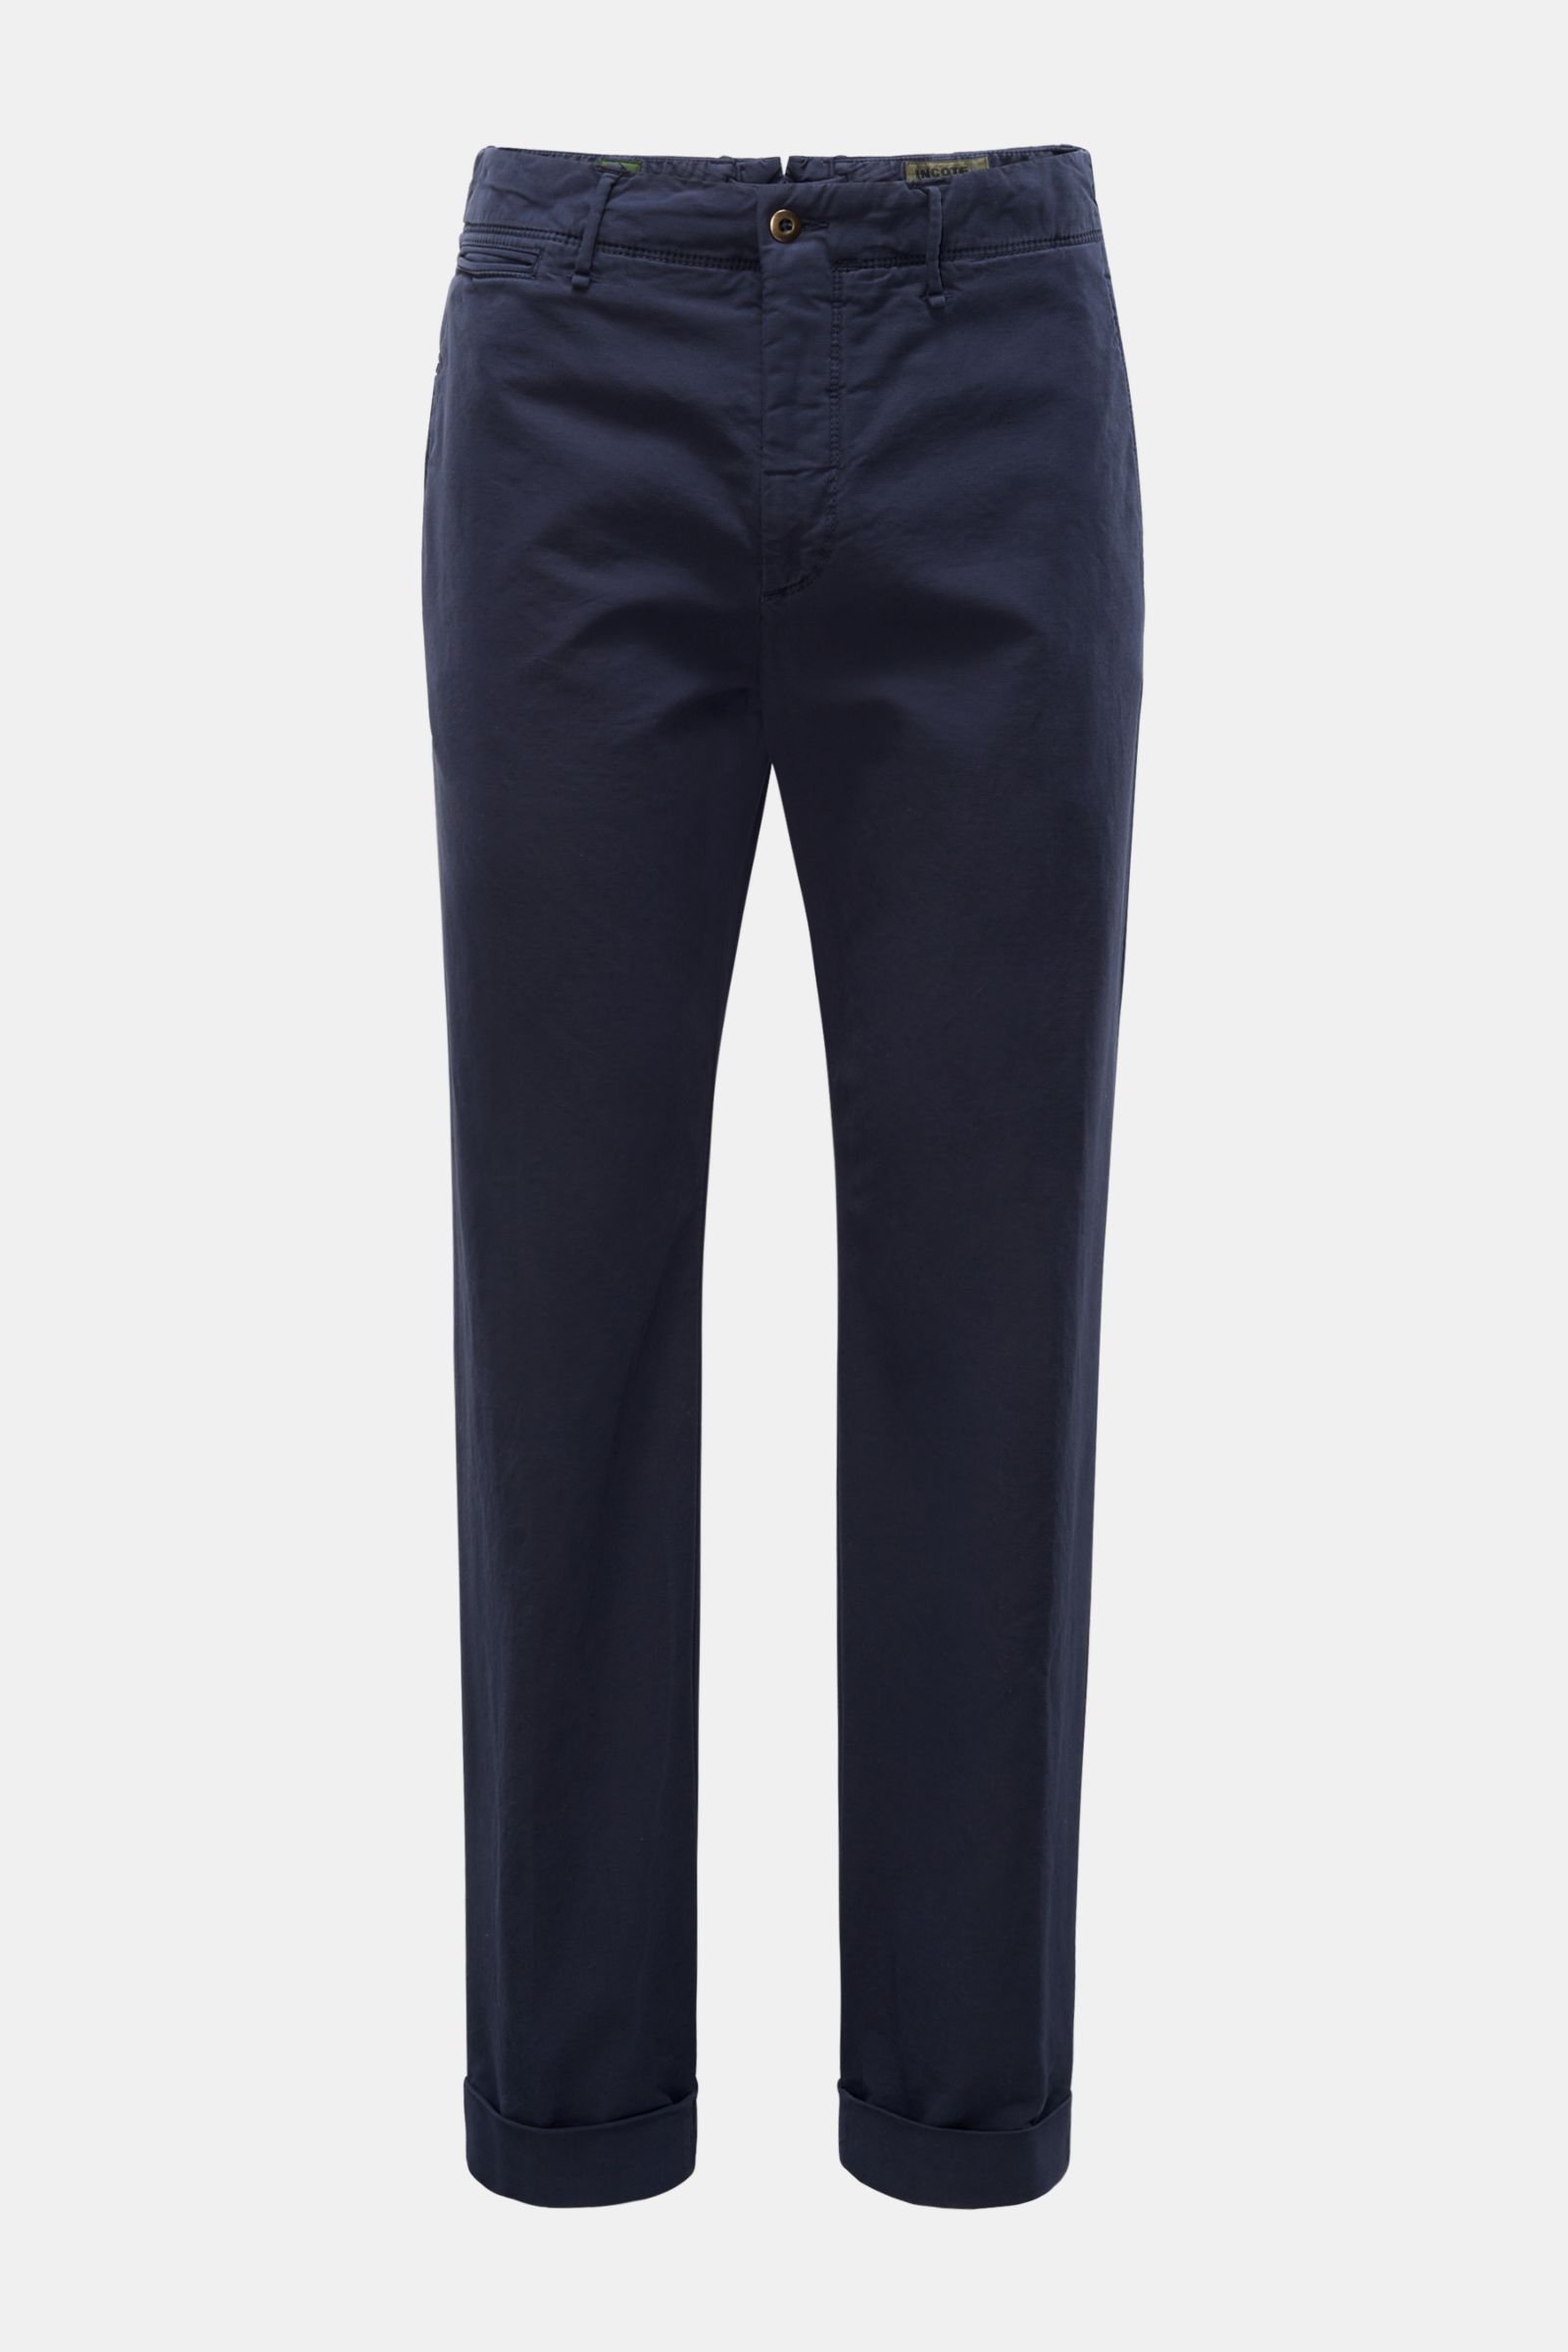 Cotton trousers 'Regular Fit' navy